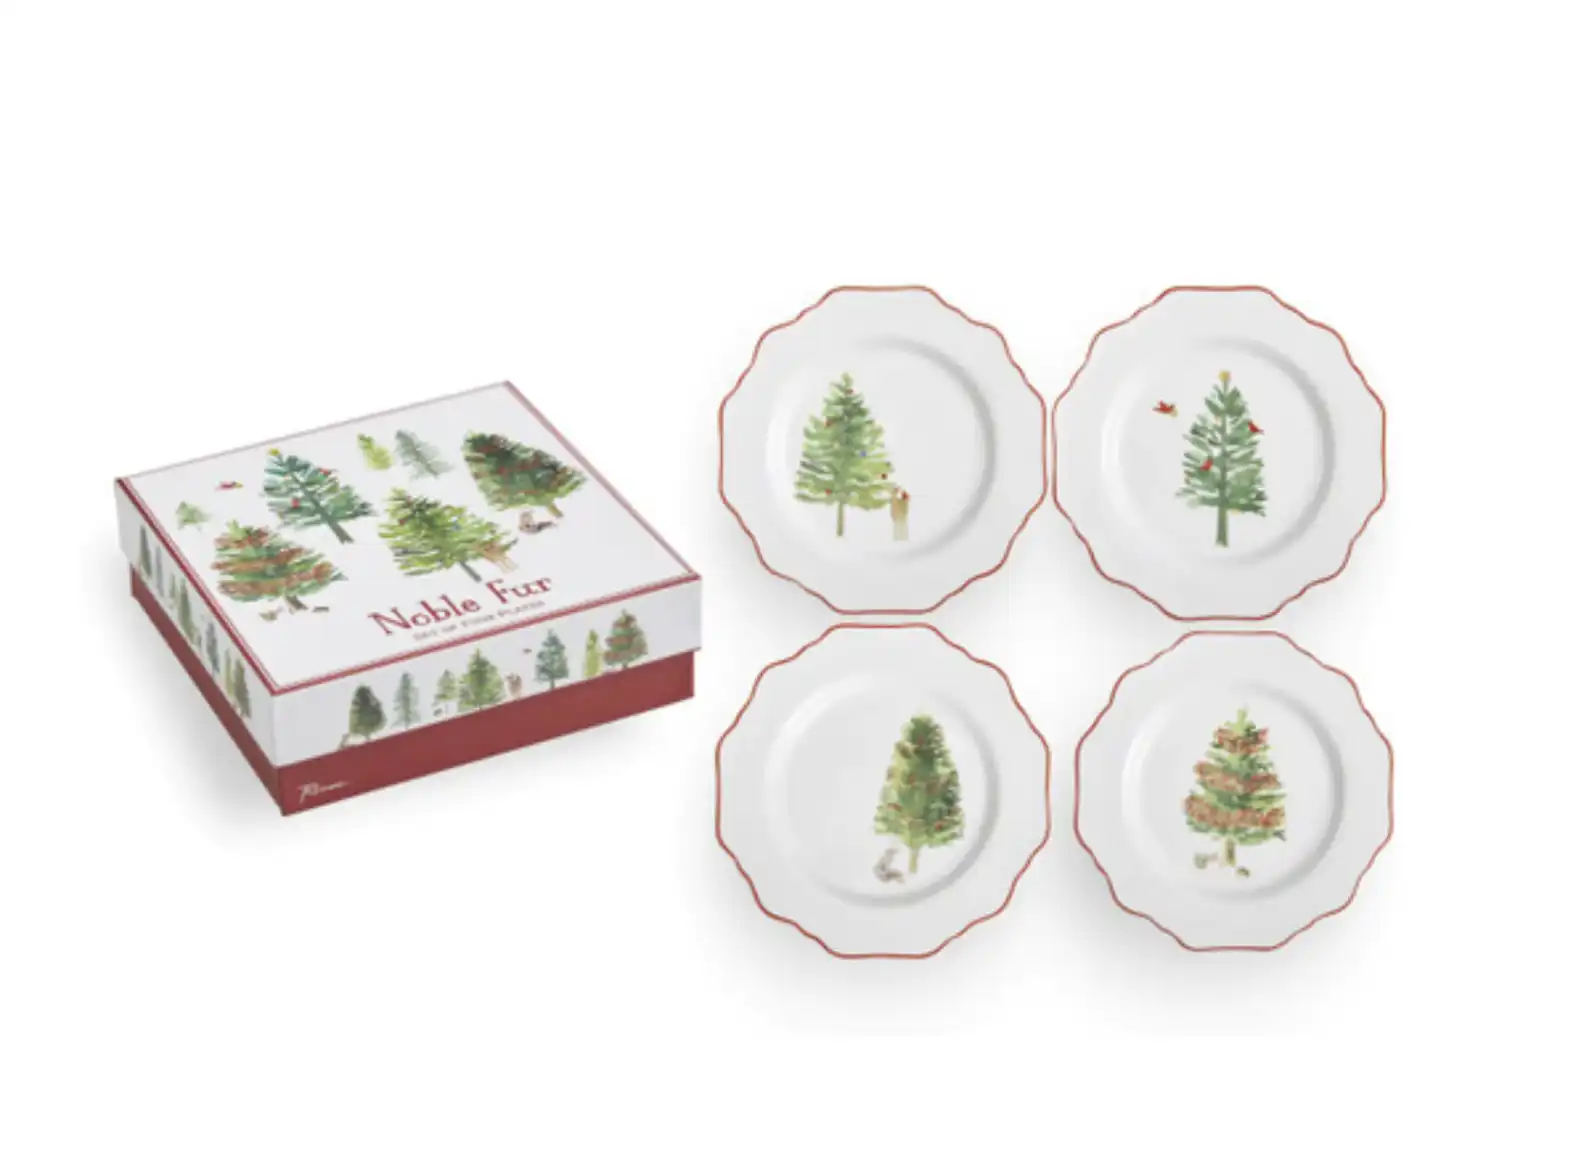 Rosanna's Noble Fur- Christmas Small Plates in gift box